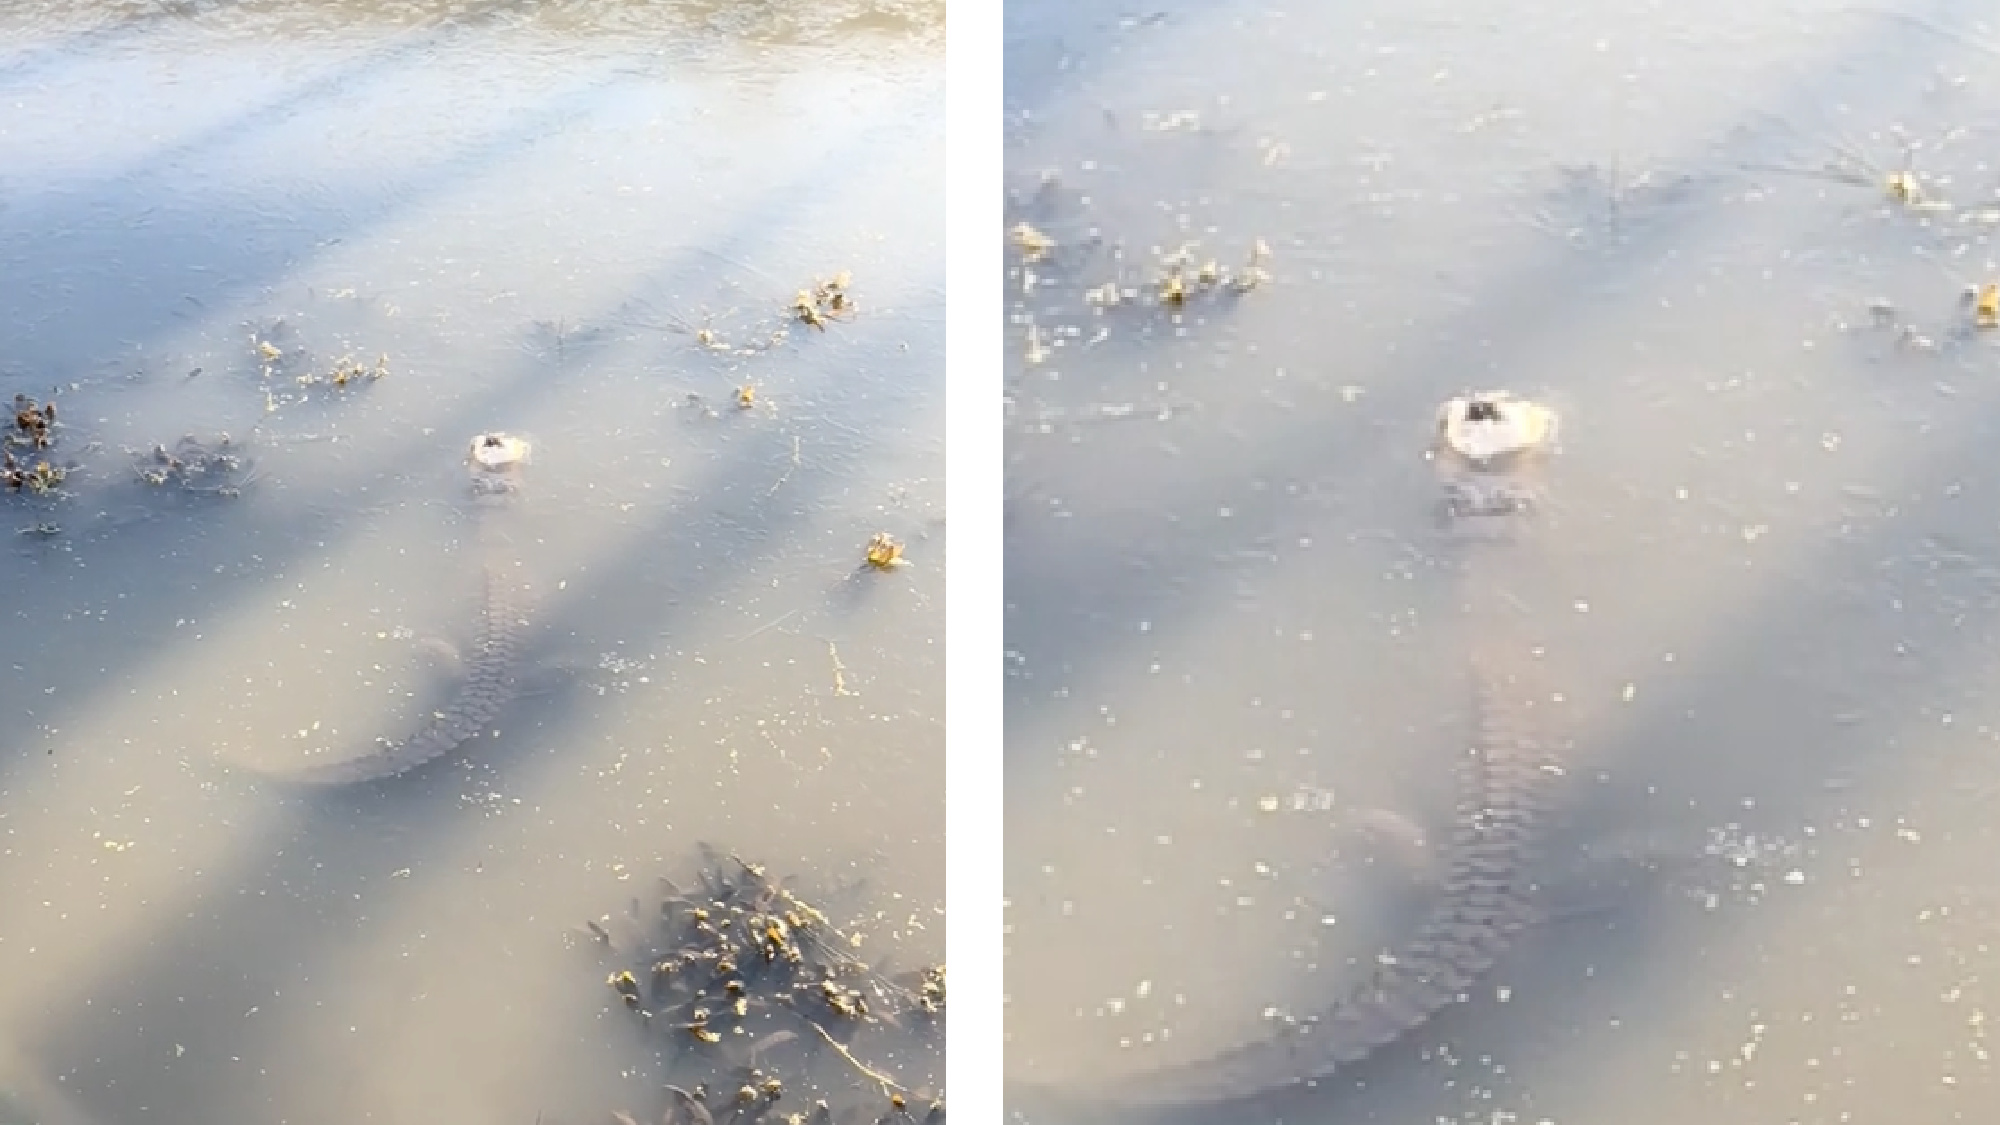 An alligator lies submerged under ice with its nose poking through to breath.